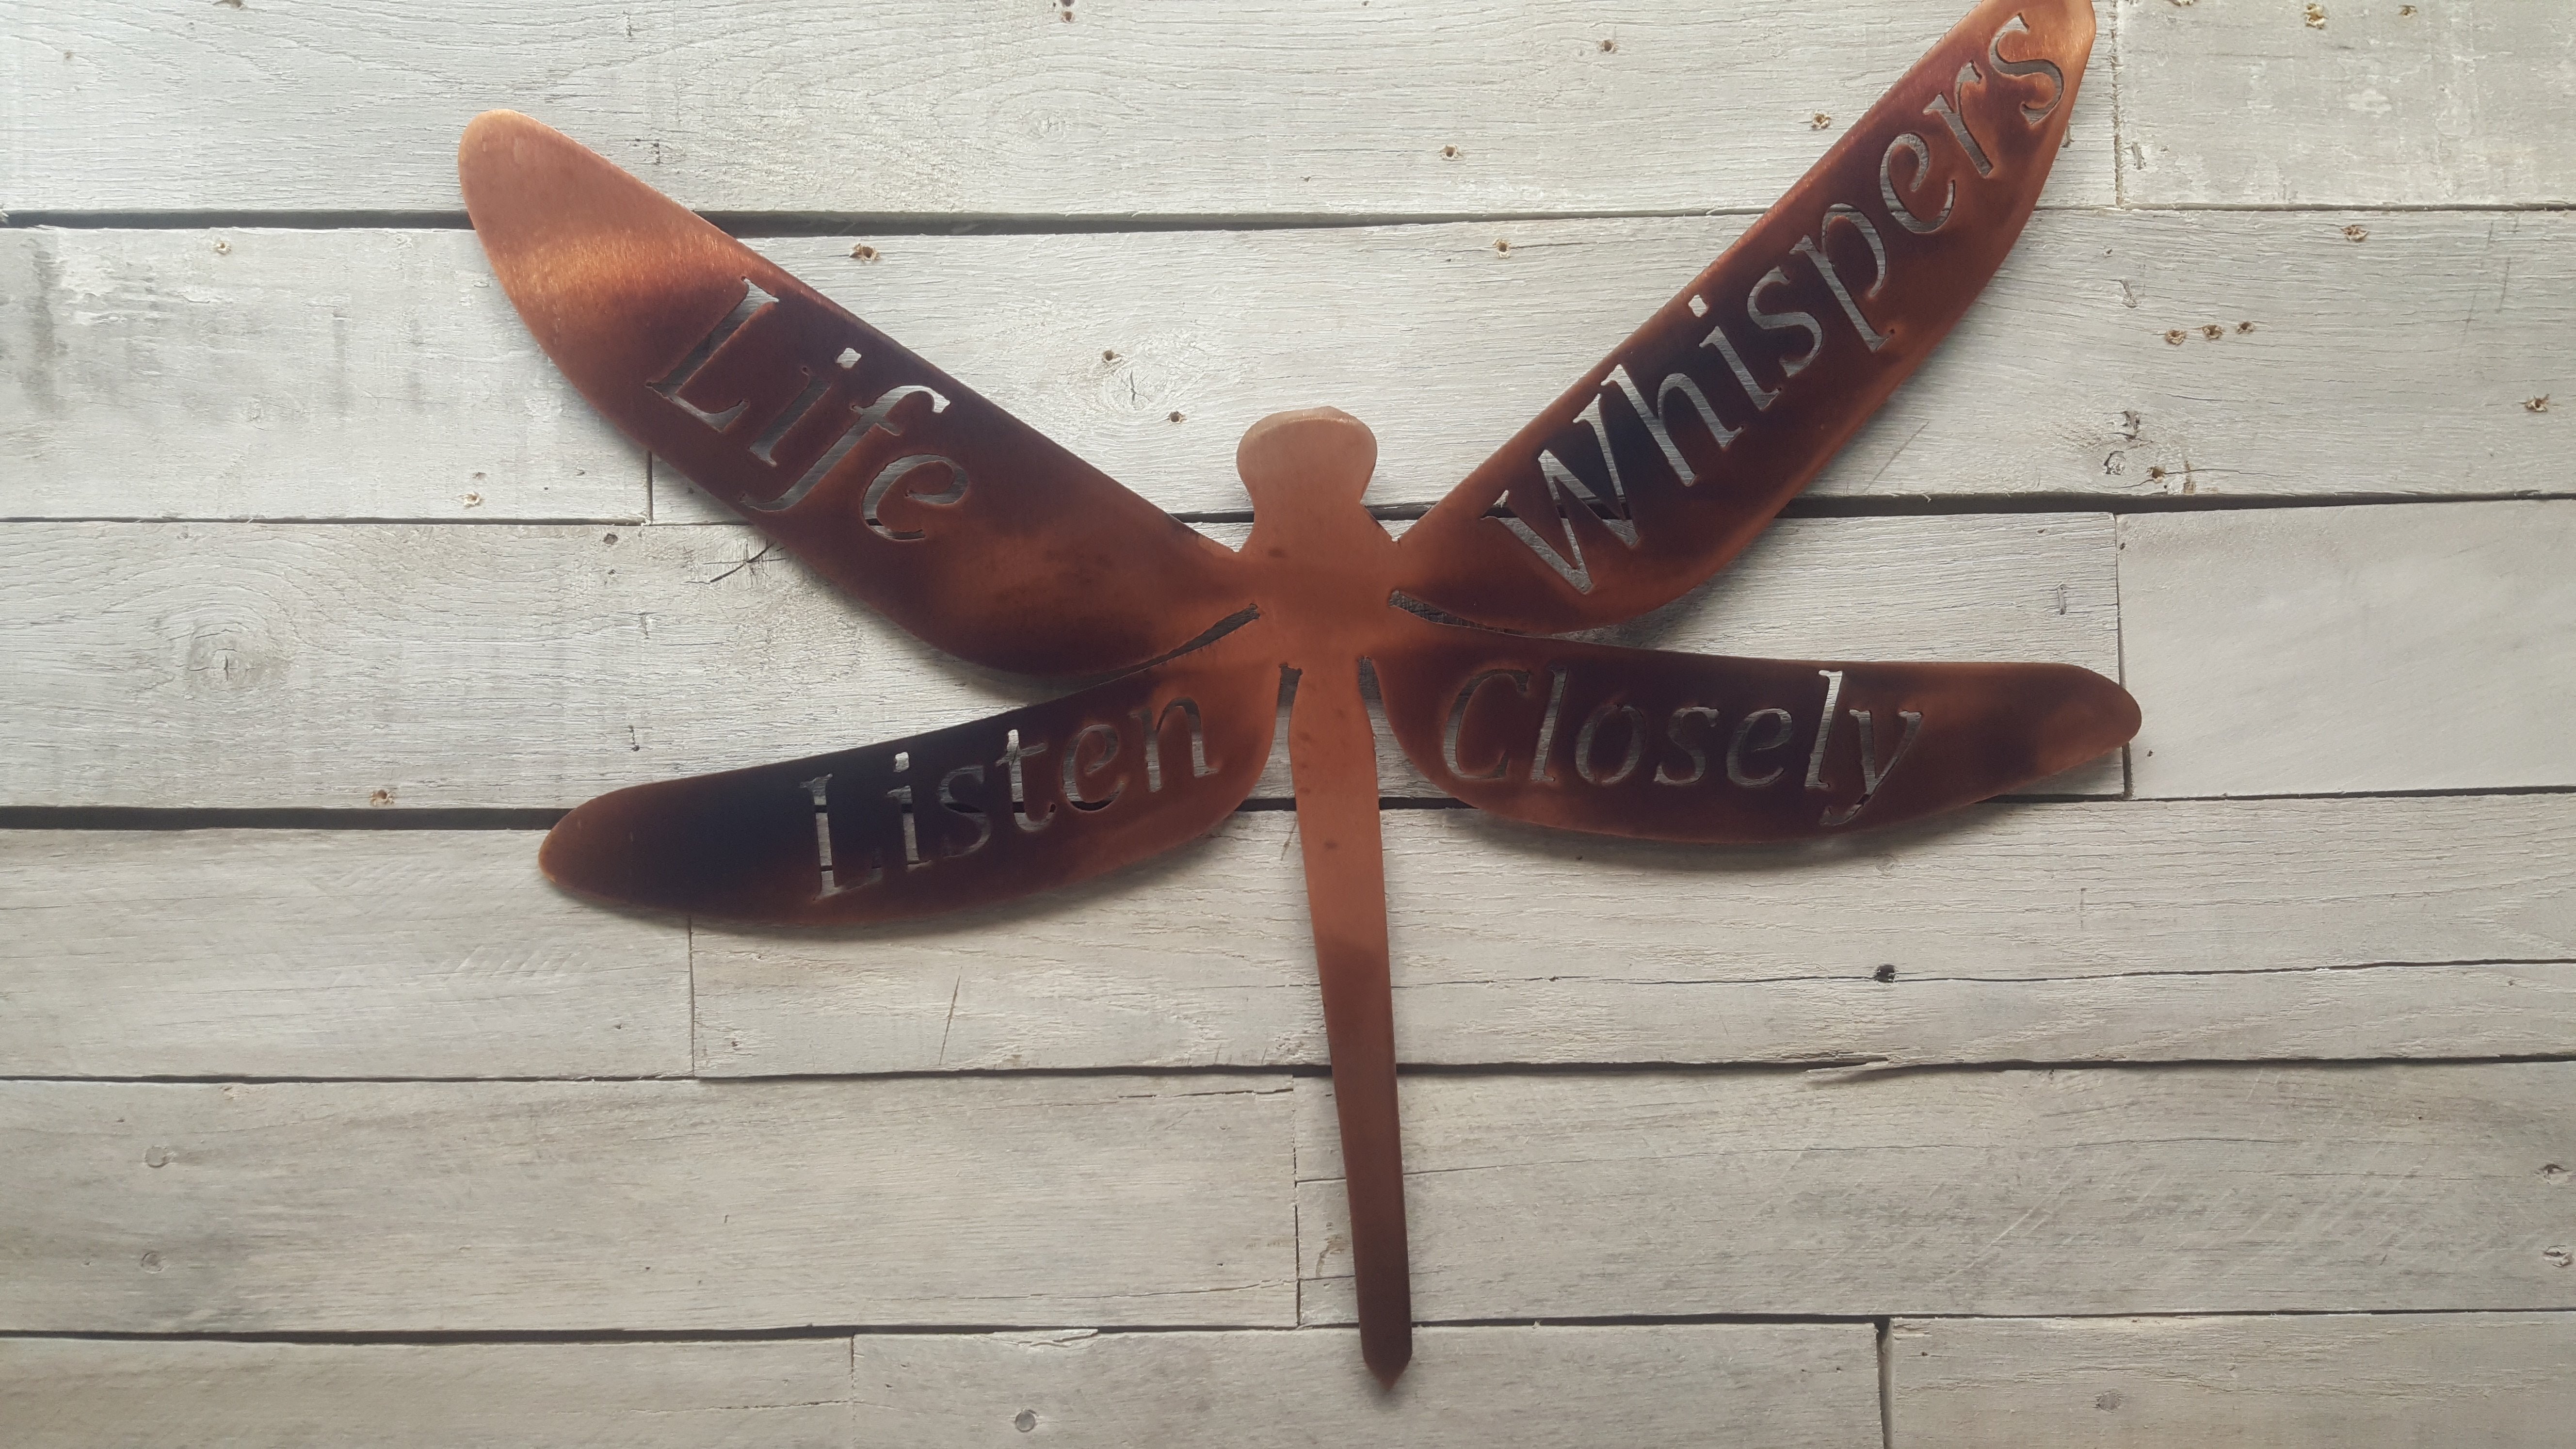 Dragonfly life whispers - Hersey Customs Inc.